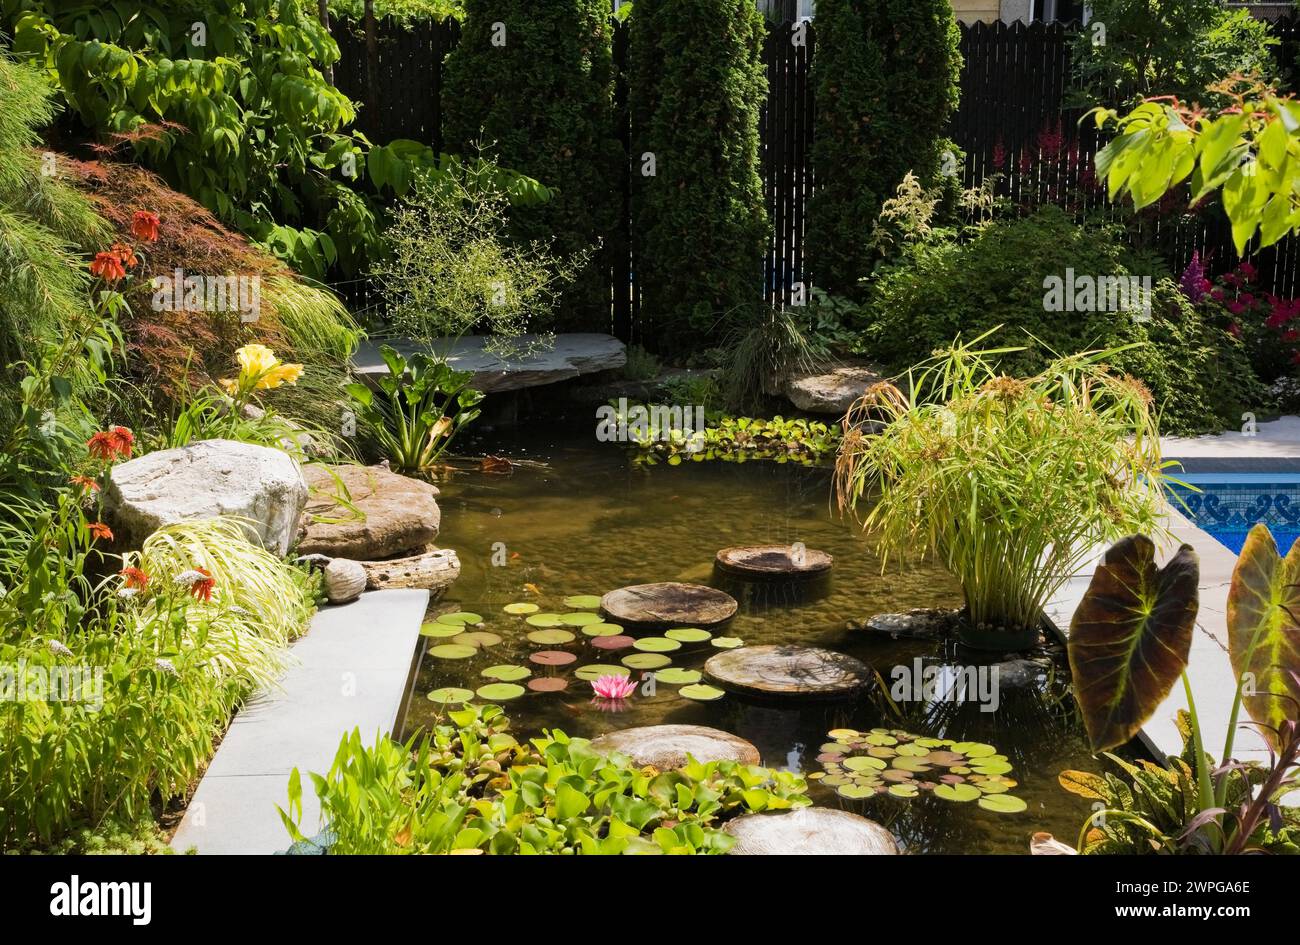 Pond with stepping stones, Eichornia crassipes - Water Hyacinth, pink Nymphaea - Water Lily, Colocasia - Elephant-Ear, red Echinacea 'Hot papaya'. Stock Photo